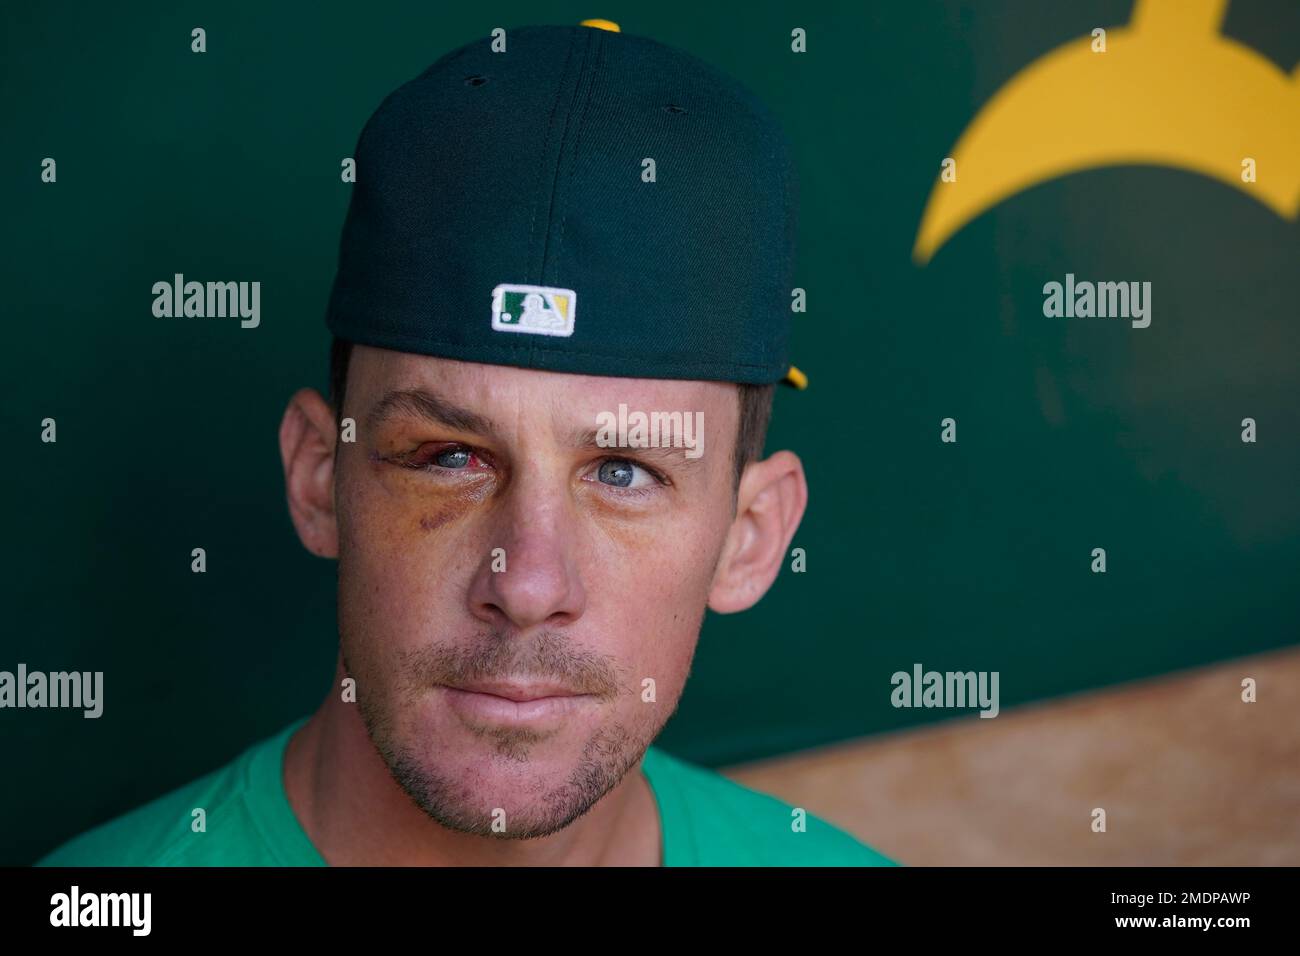 Oakland Athletics pitcher Chris Bassitt holds a trident while interviewed  after the Athletics defeated the Los Angeles Angels in a baseball game in  Oakland, Calif., Thursday, May 27, 2021. (AP Photo/Jeff Chiu